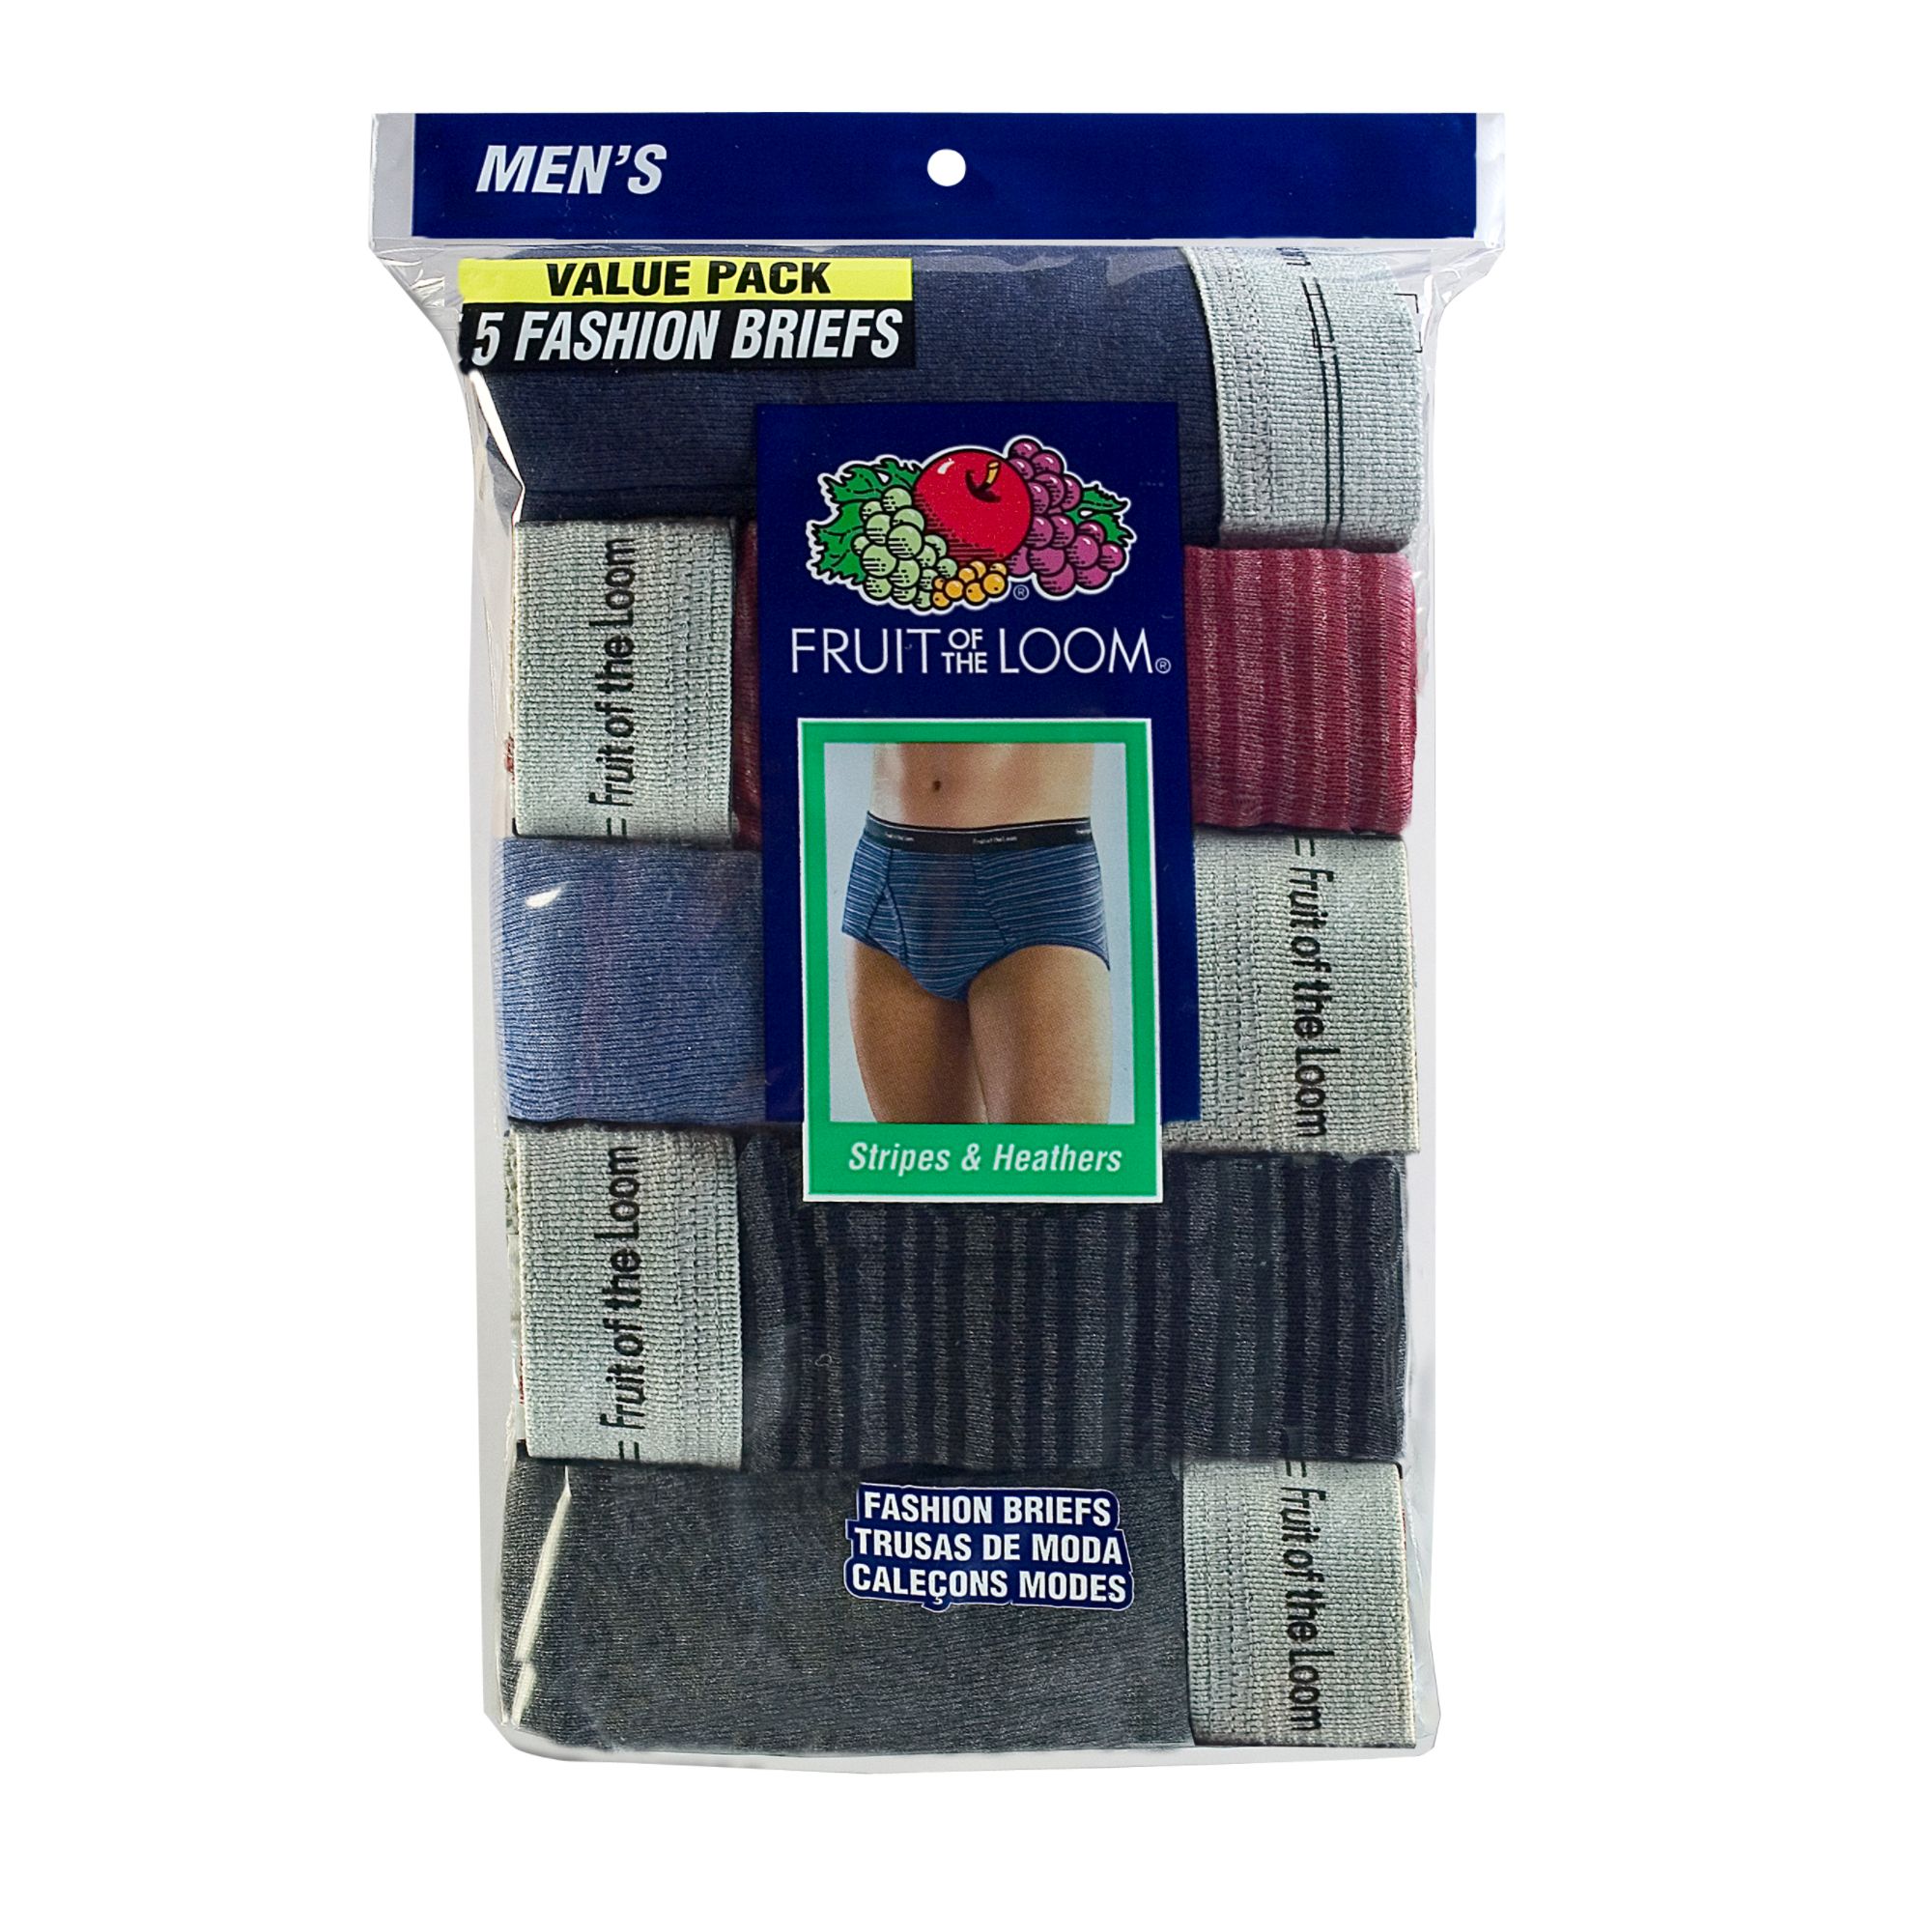 Fruit of the Loom Men's Fashion Brief - Stripe / Heather 5 pack